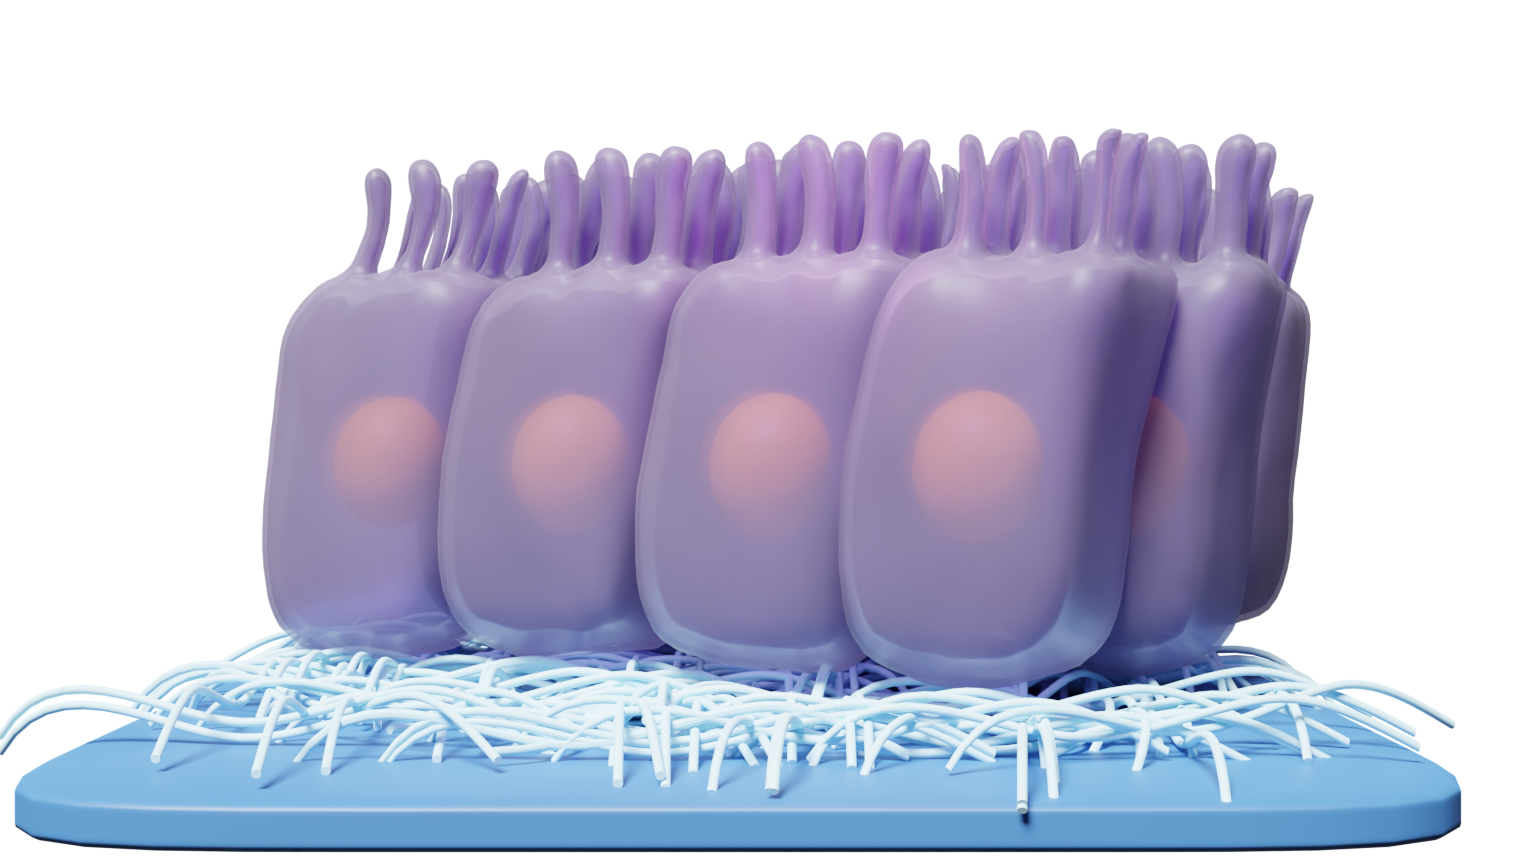 an illustration of purple epithelial cells on a white background. the group of cells are all sitting clustered together on strings representing the ecm. 